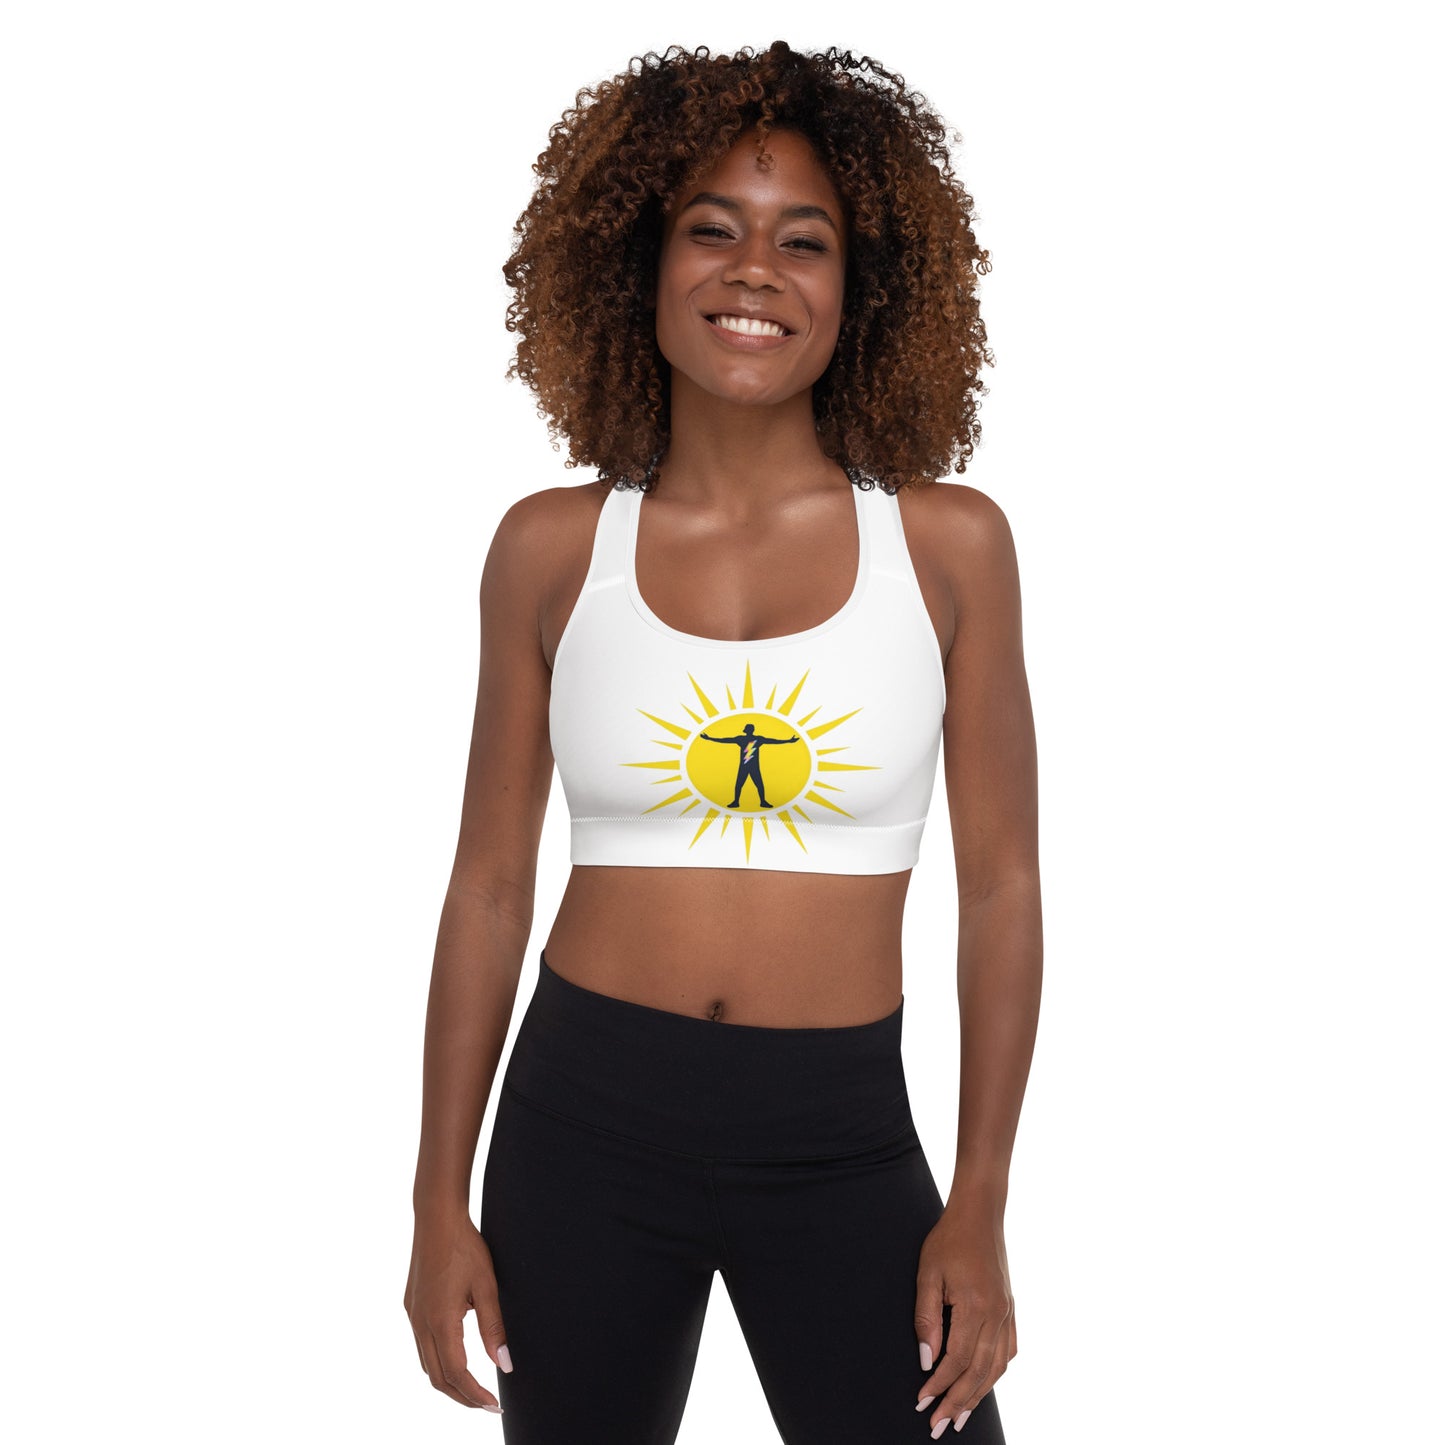 Padded Sports Bra with A&S logo